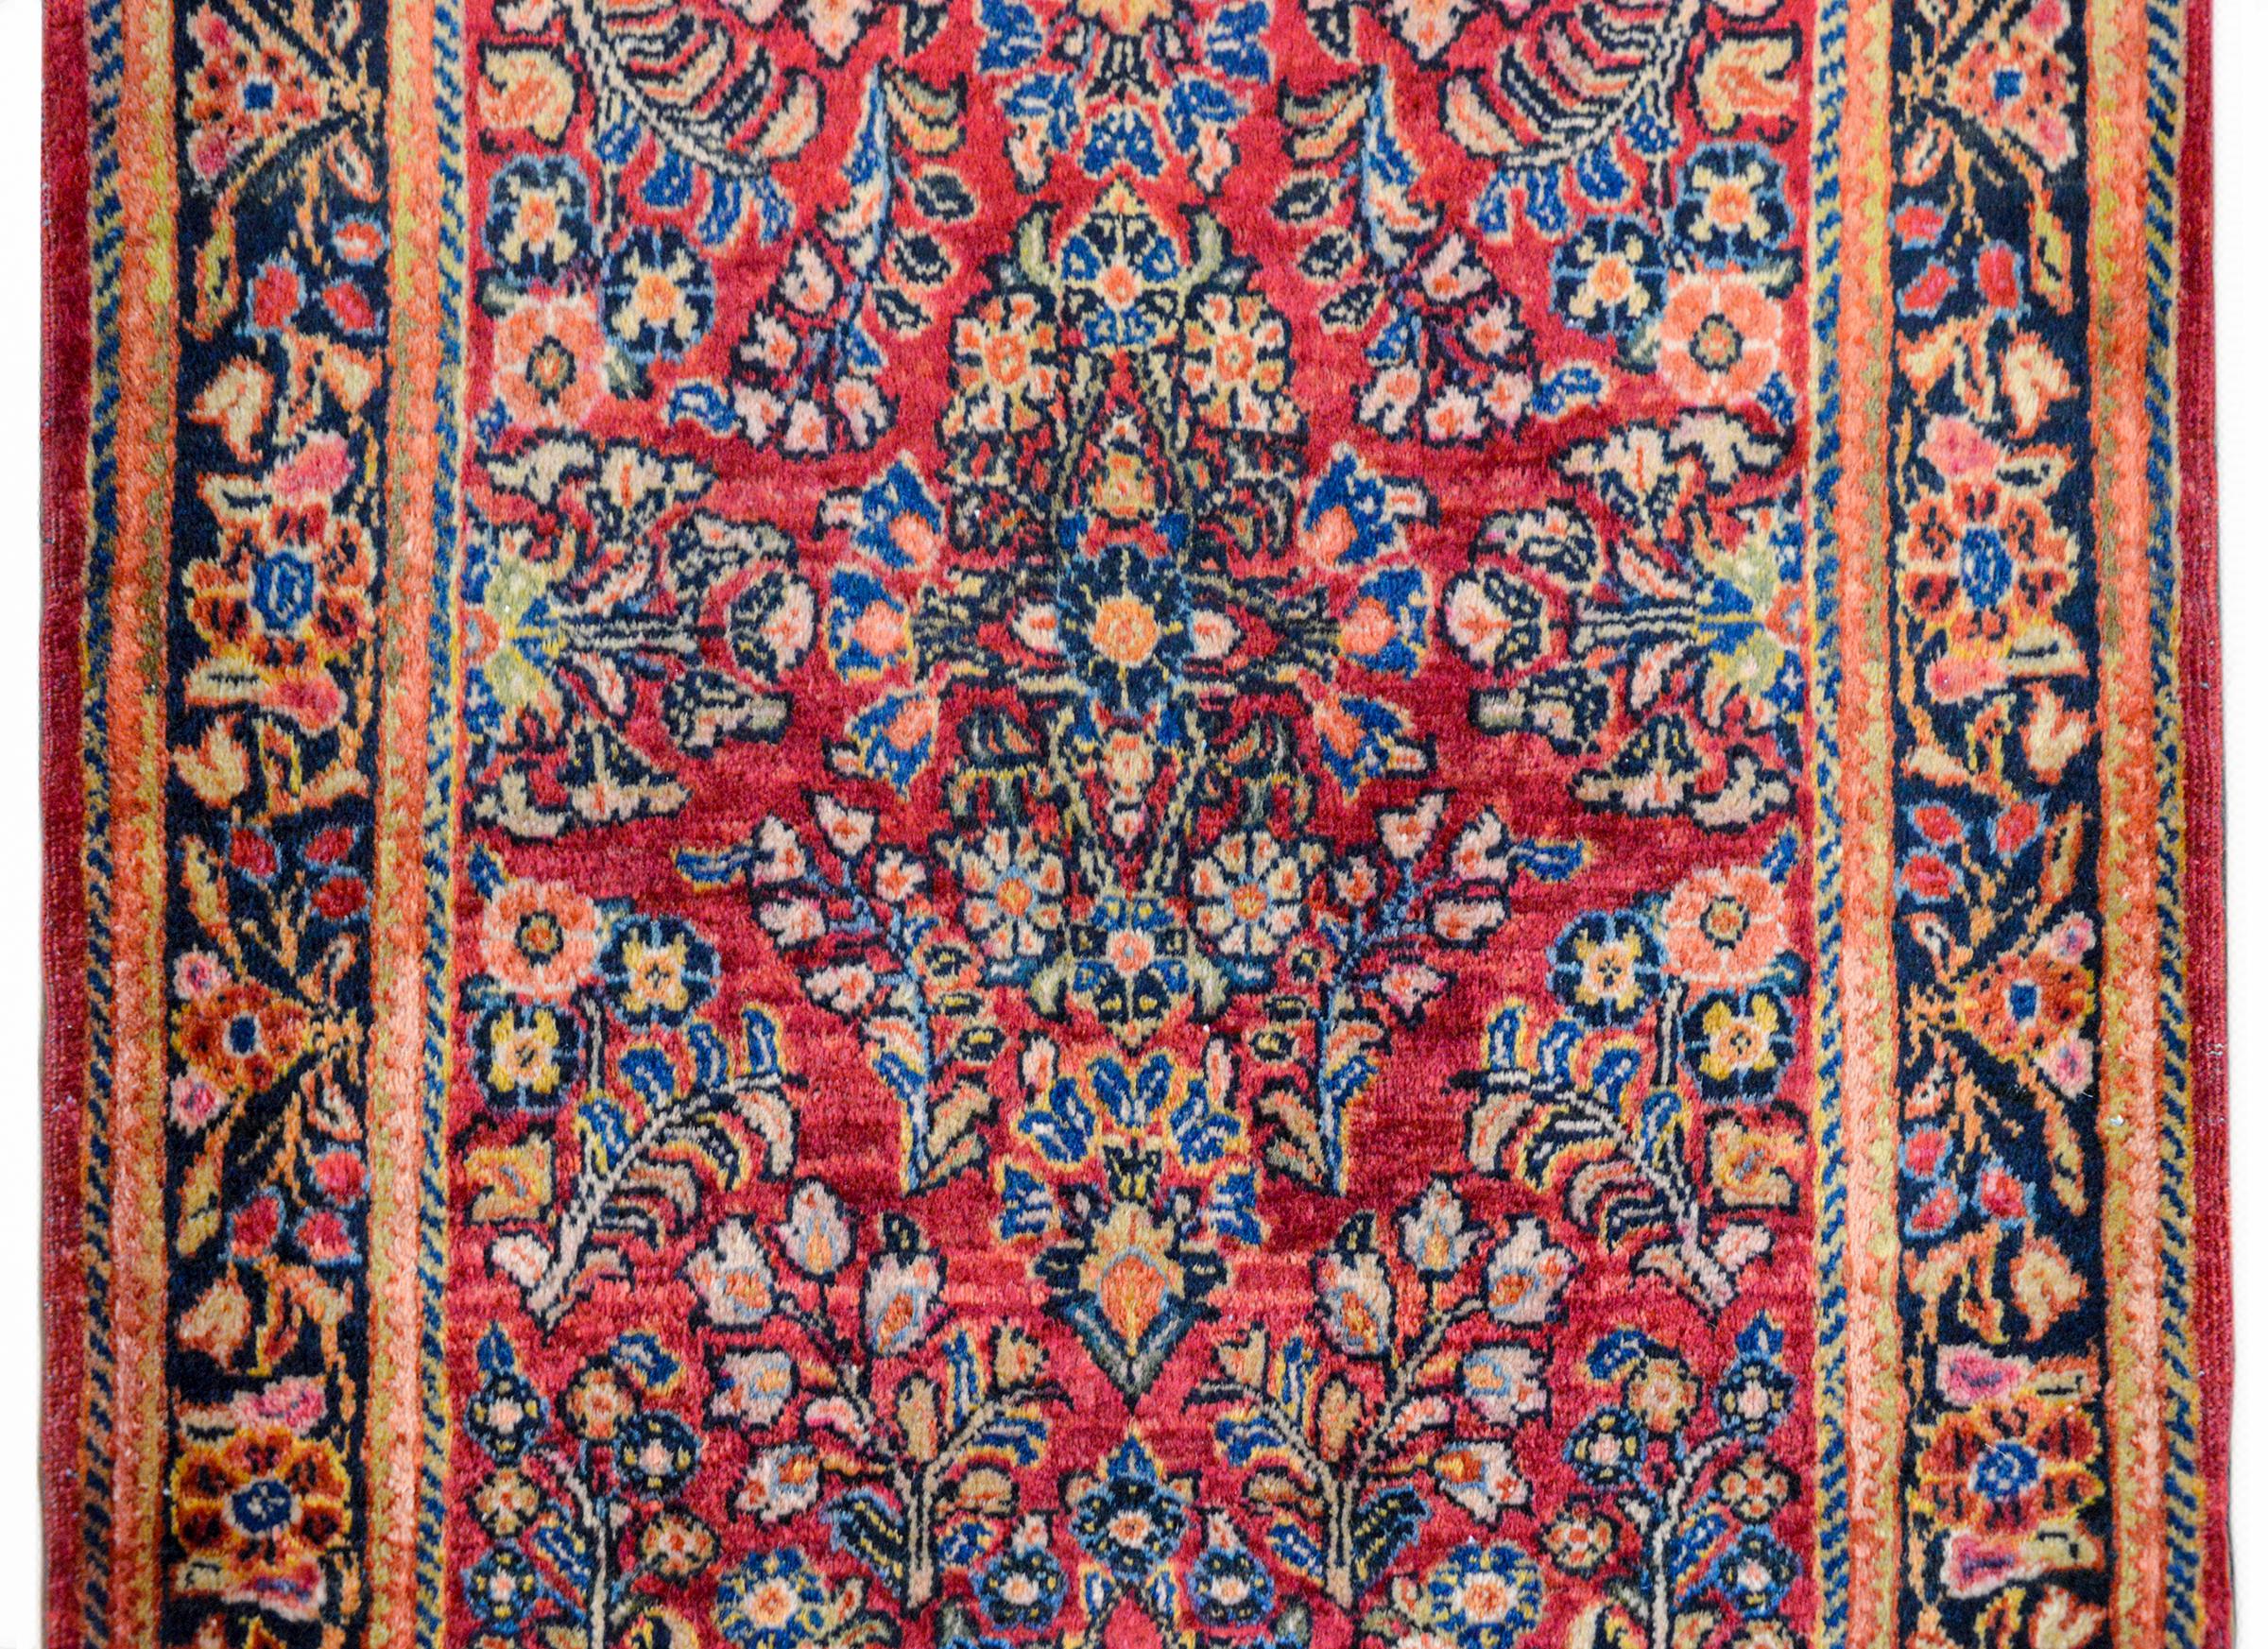 A beautiful early 20th century Persian Sarouk rug with a mirrored floral pattern woven in pink, light and dark indigo, cream, and brown against a cranberry colored background. The border is wide with a large floral partnered central stripe flanked